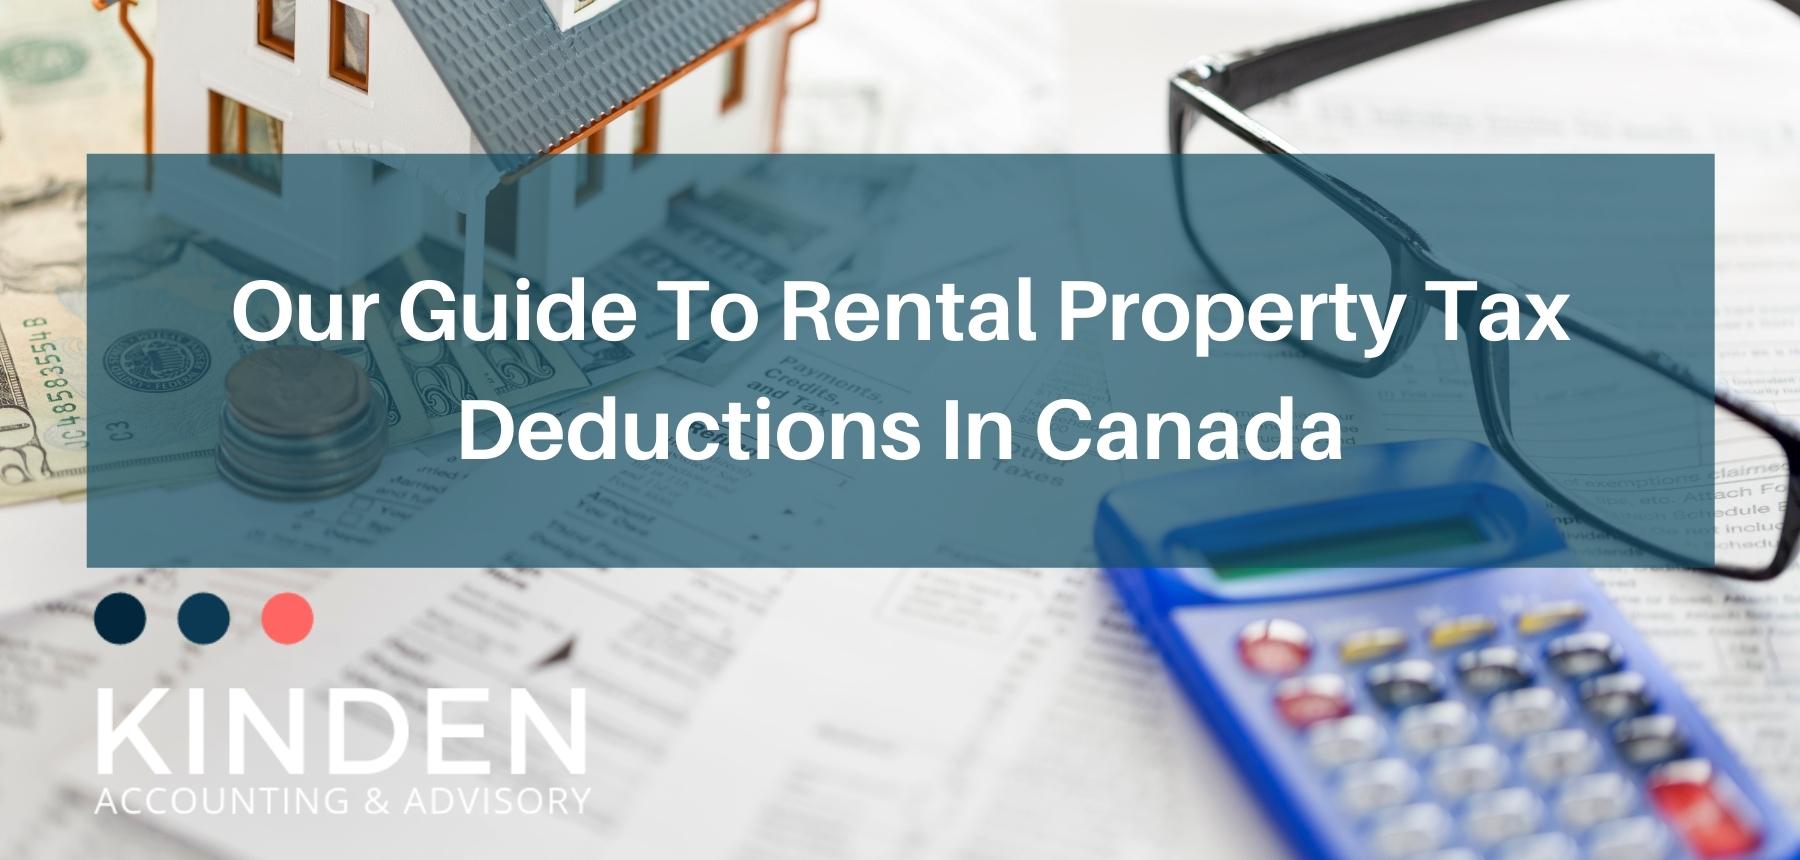 Our Guide To Rental Property Tax Deductions In Canada